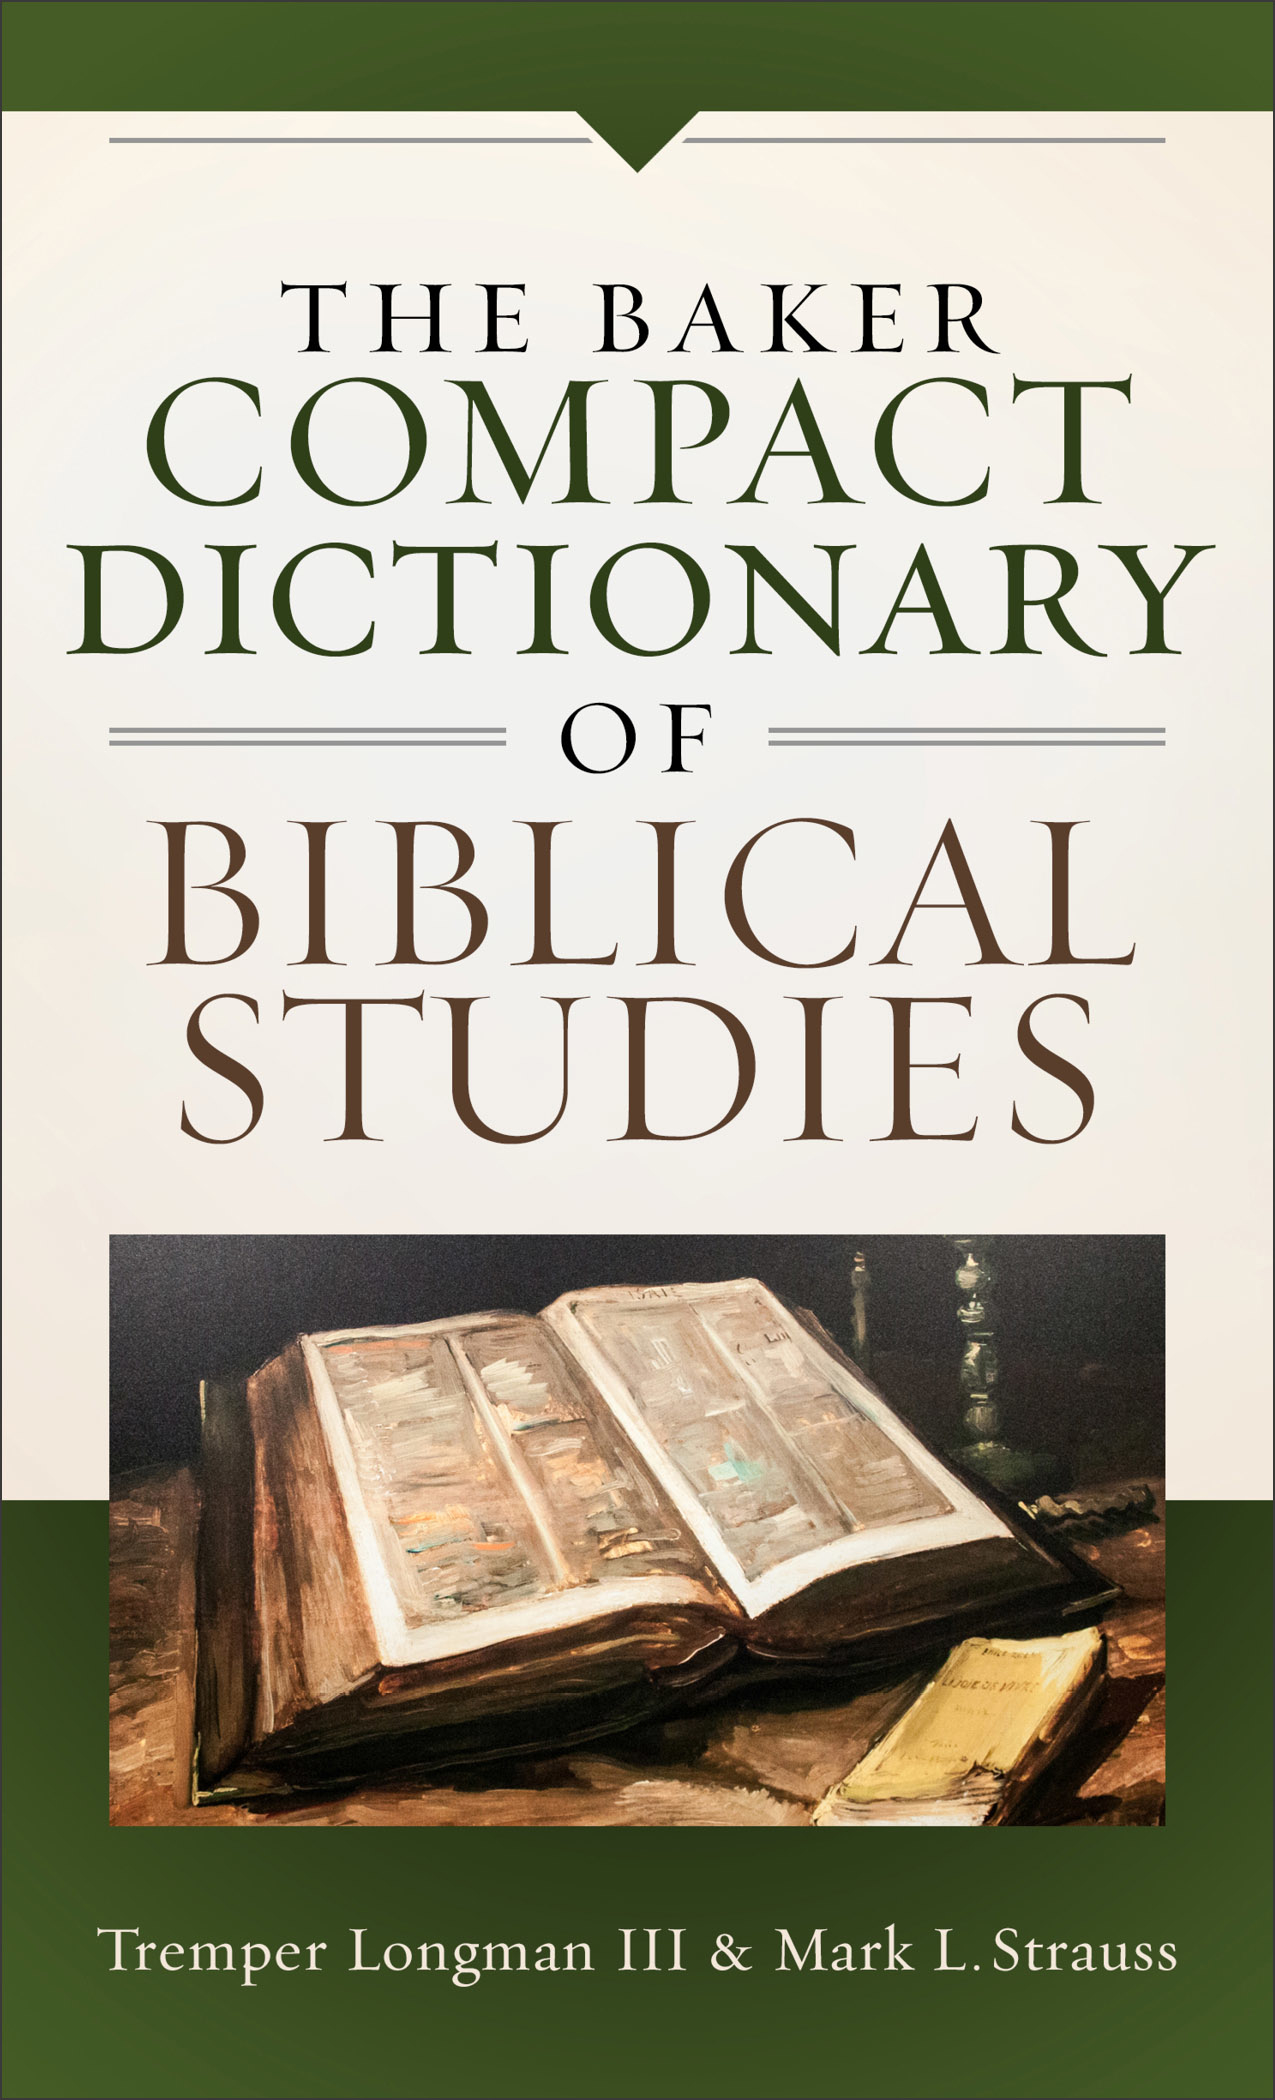 The Baker Compact Dictionary of Biblical Studies